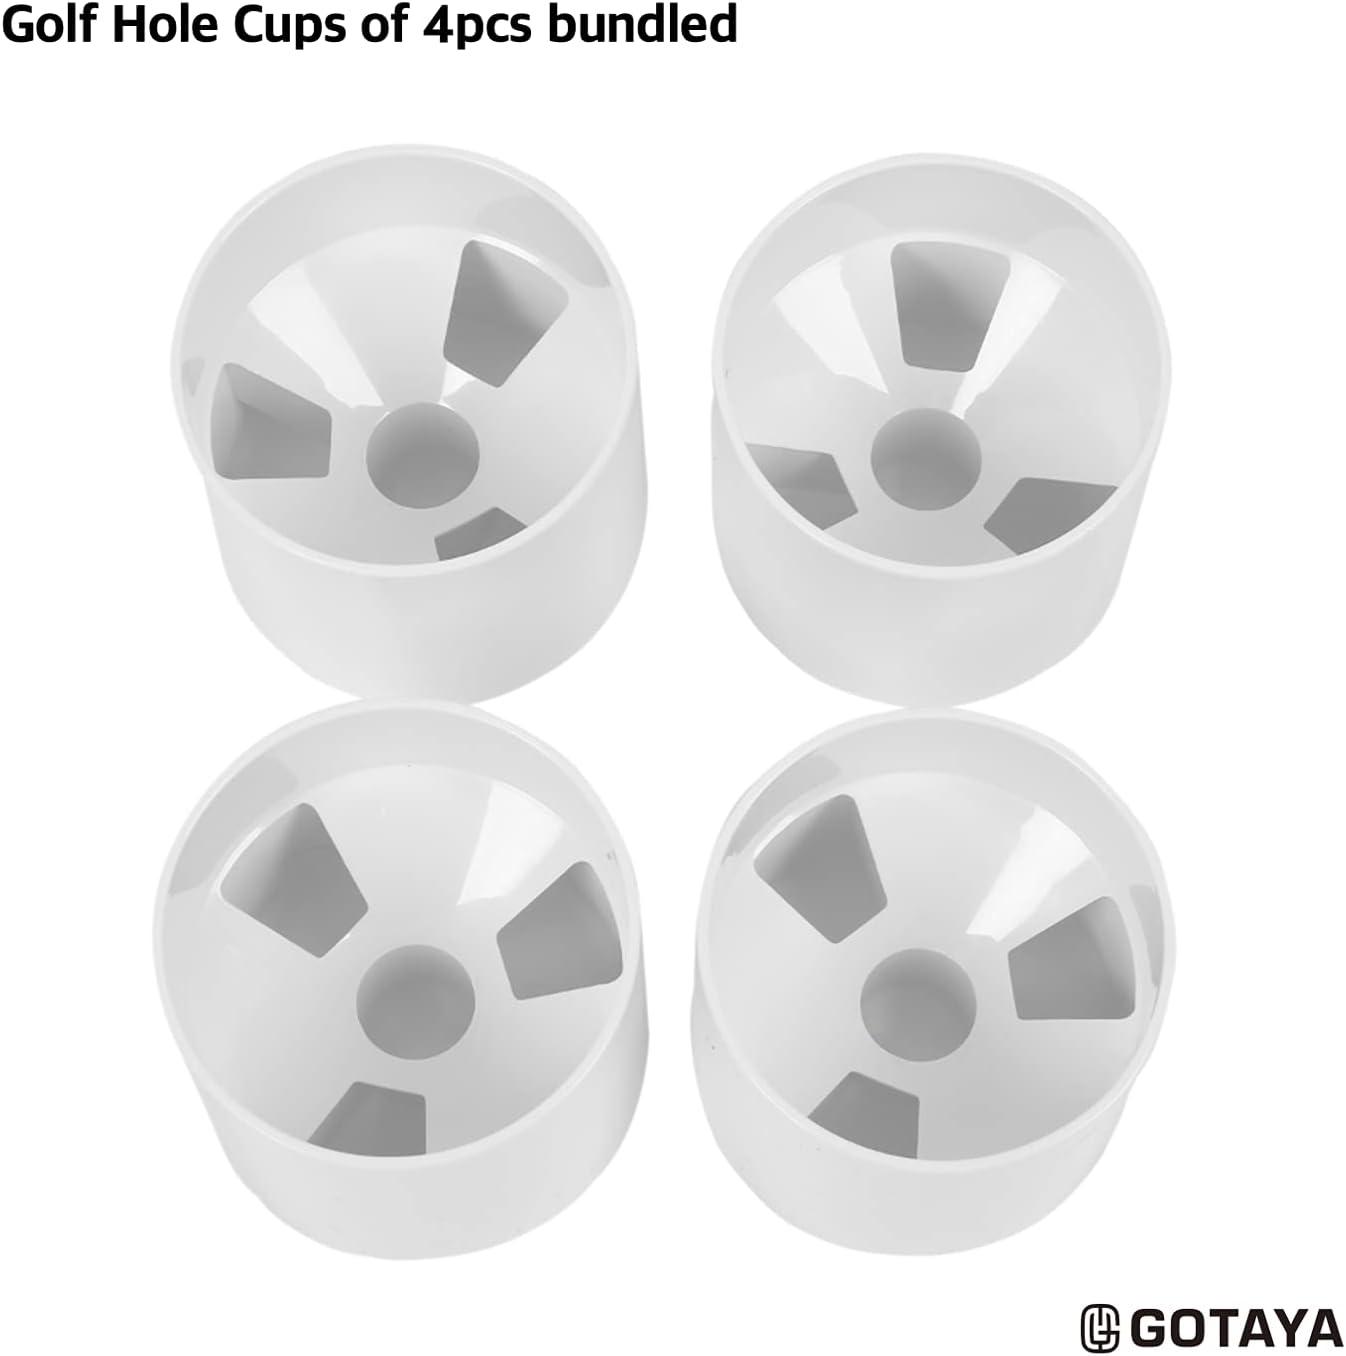 Tiitstoy Golf Green Hole Cup Cover Cover Hole Cup Cover Cup Hole Protection  Green Hole Is Not Easy To Damage Is A Good Accessory On The Green 2Pcs 